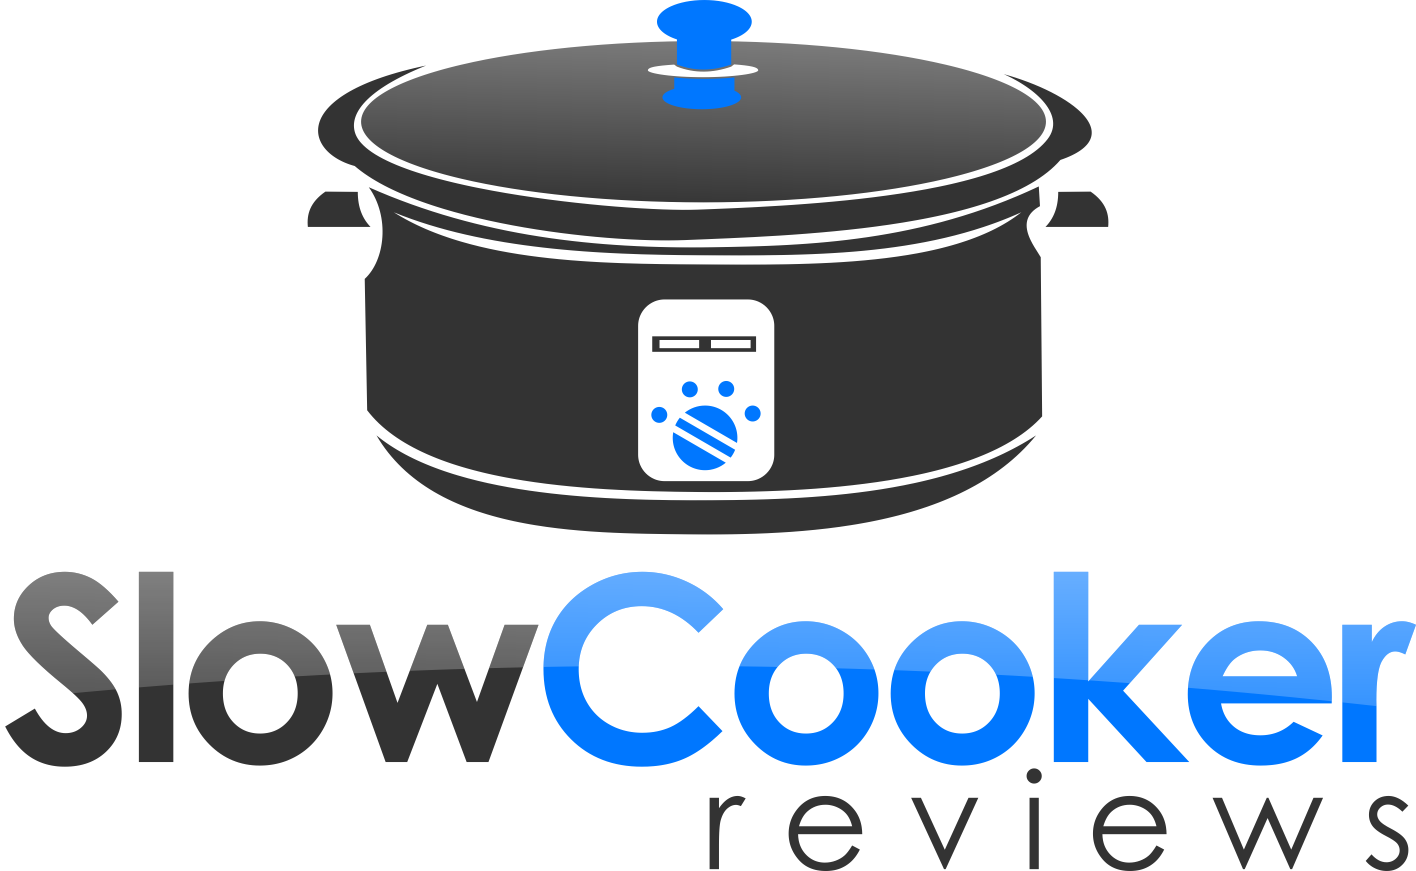 Slow Cooker Clipart, Crock Pot Clip Art Crockpot Cook Cooking Dinner Chef  Retro Food Icon Cute Digital Graphic Design Small Commercial Use 